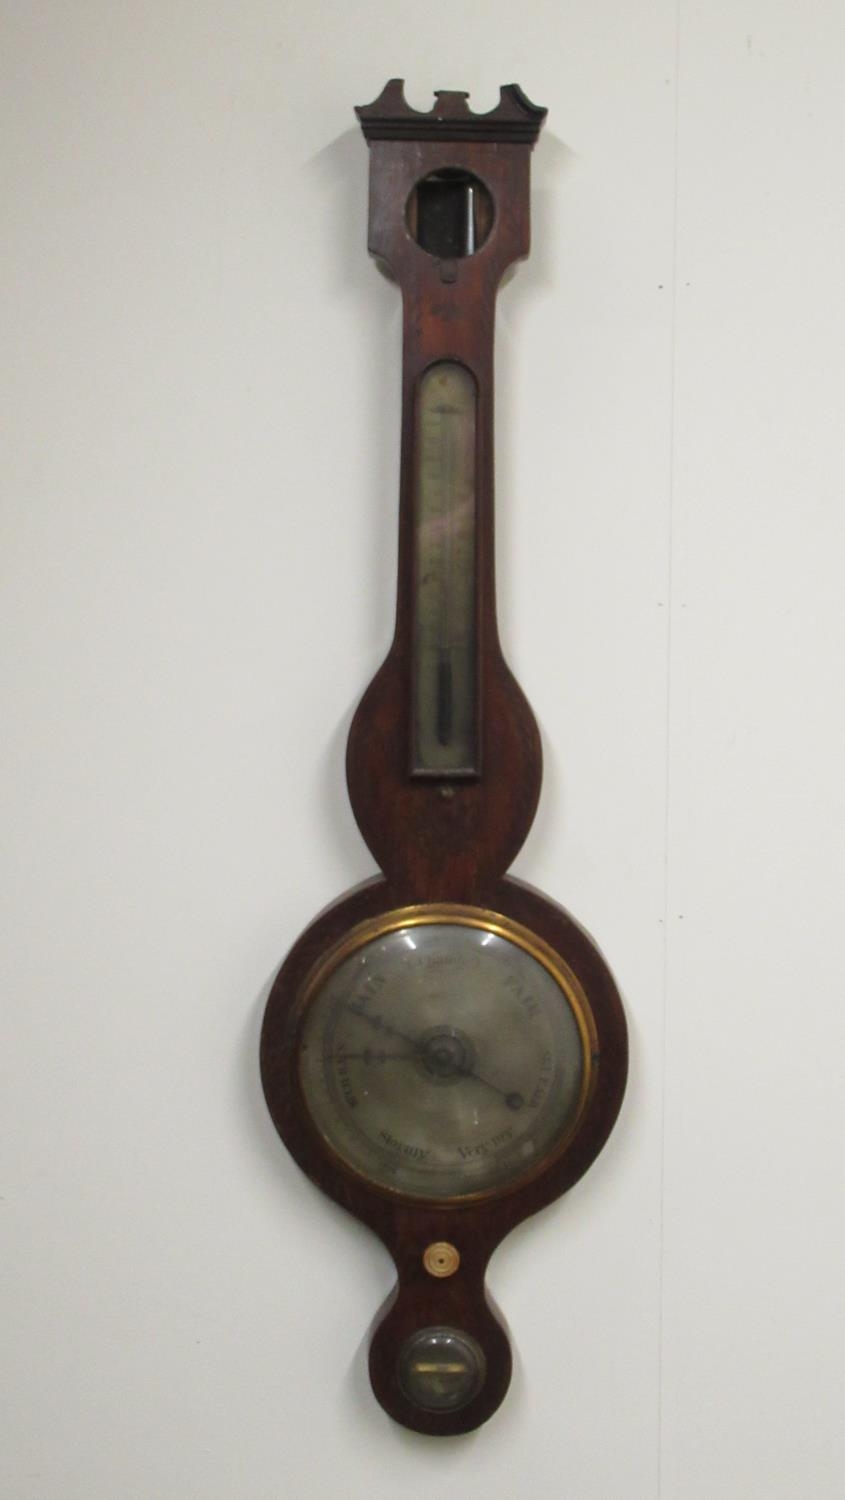 C19th mahogany wheel barometer with painted decoration, silvered dial, thermometer box and level. (